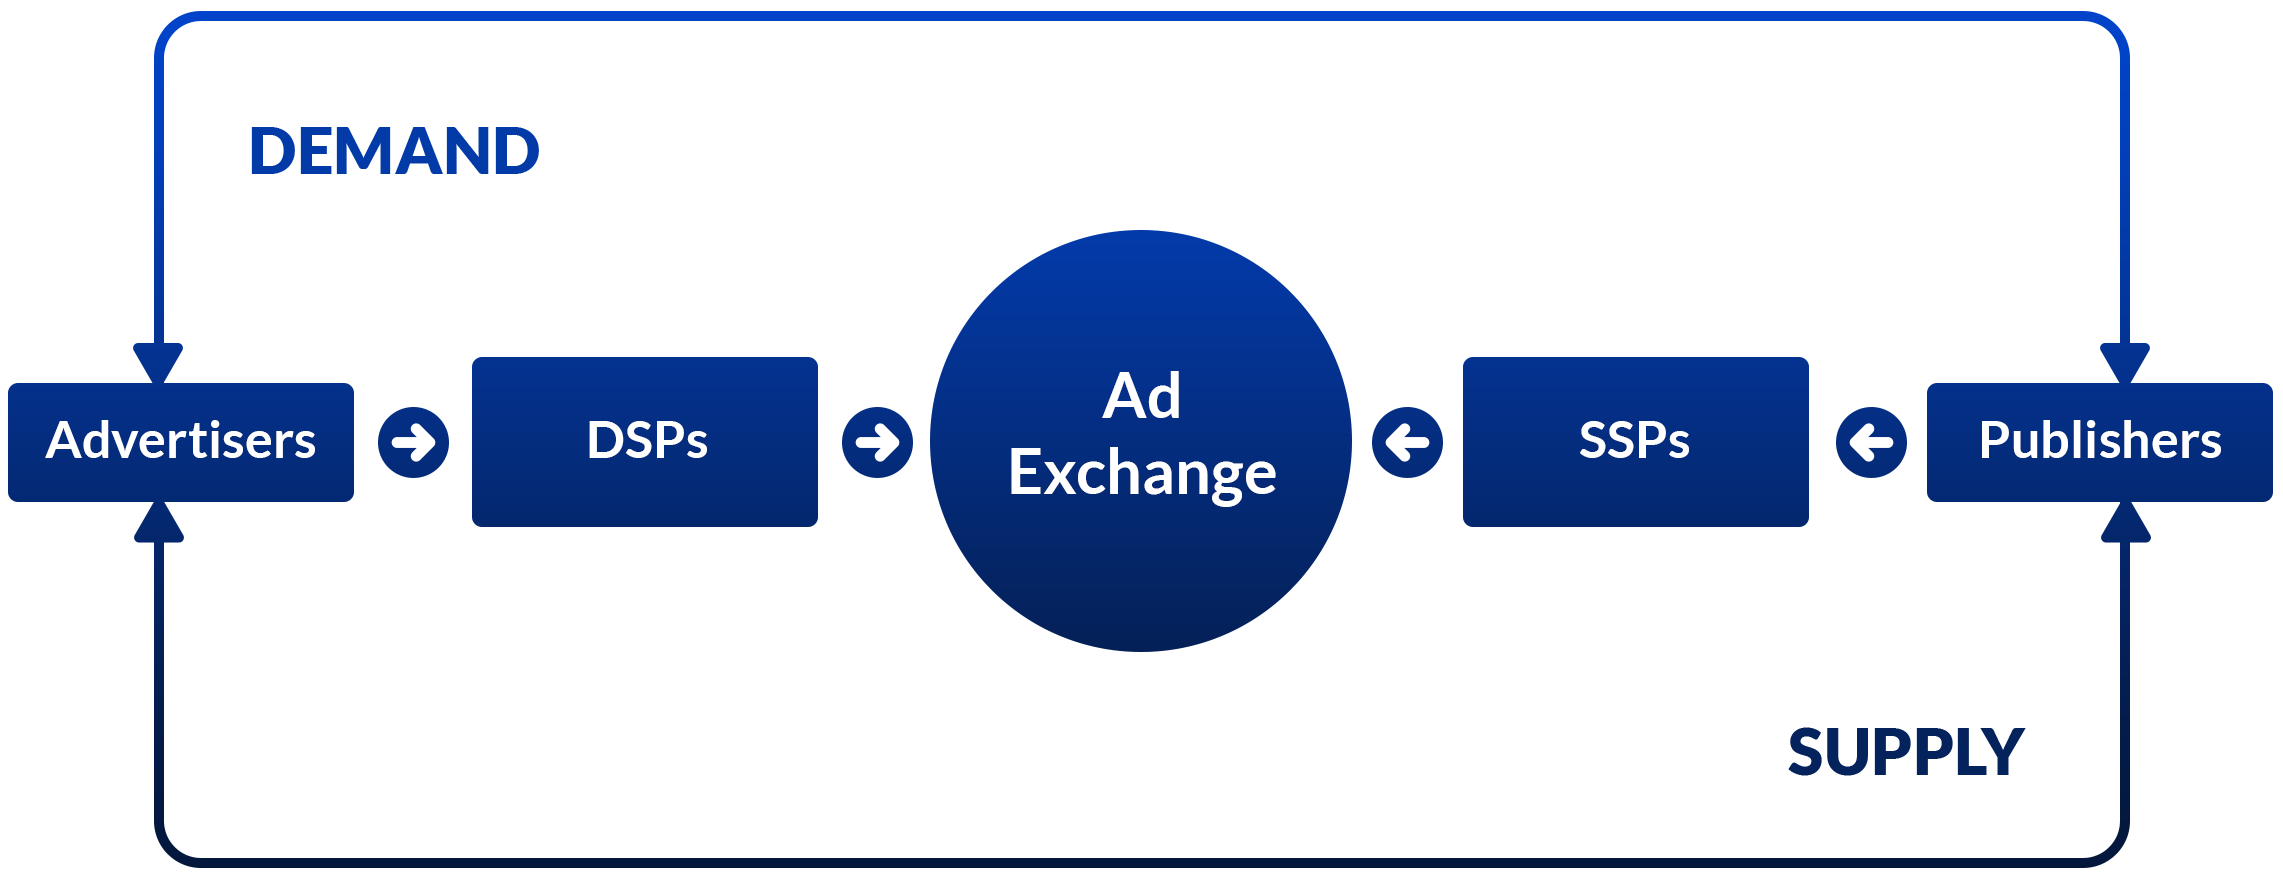 How ad exchanges work image - Placement of publishers, advertisers, DSPs, and SSPs in ad exchange ecosystems